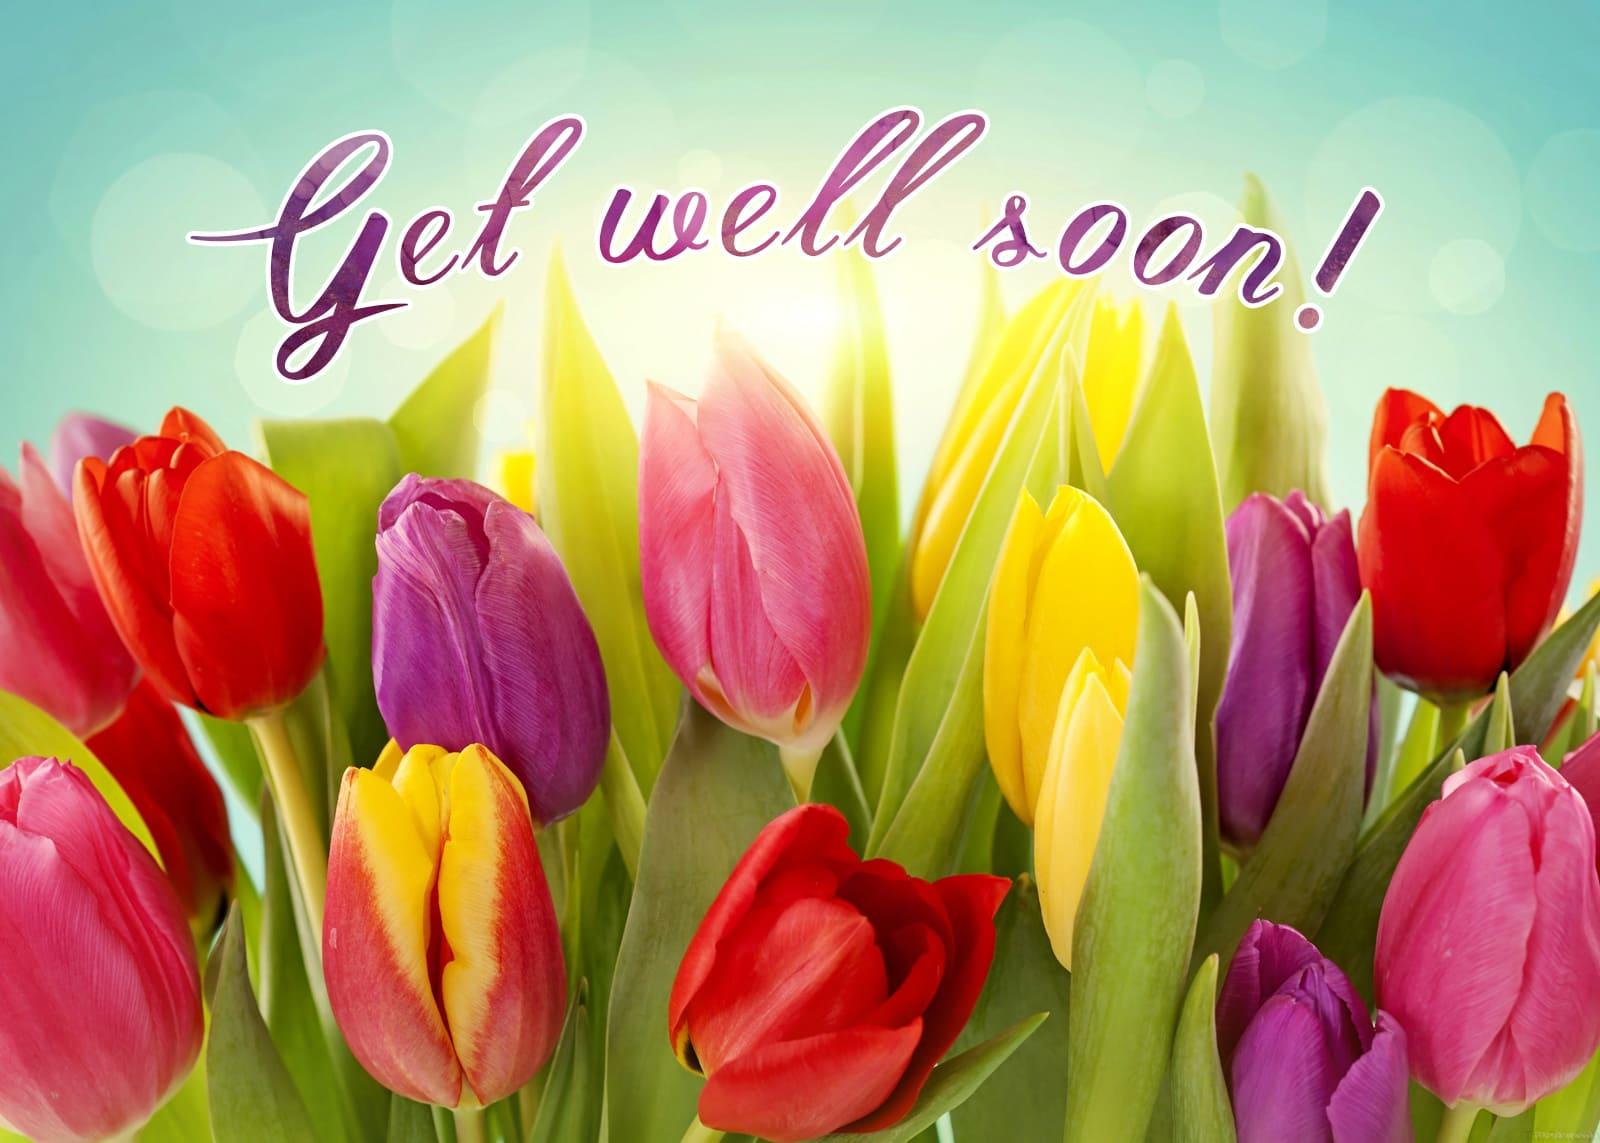 Get Well Soon Card With Flowers